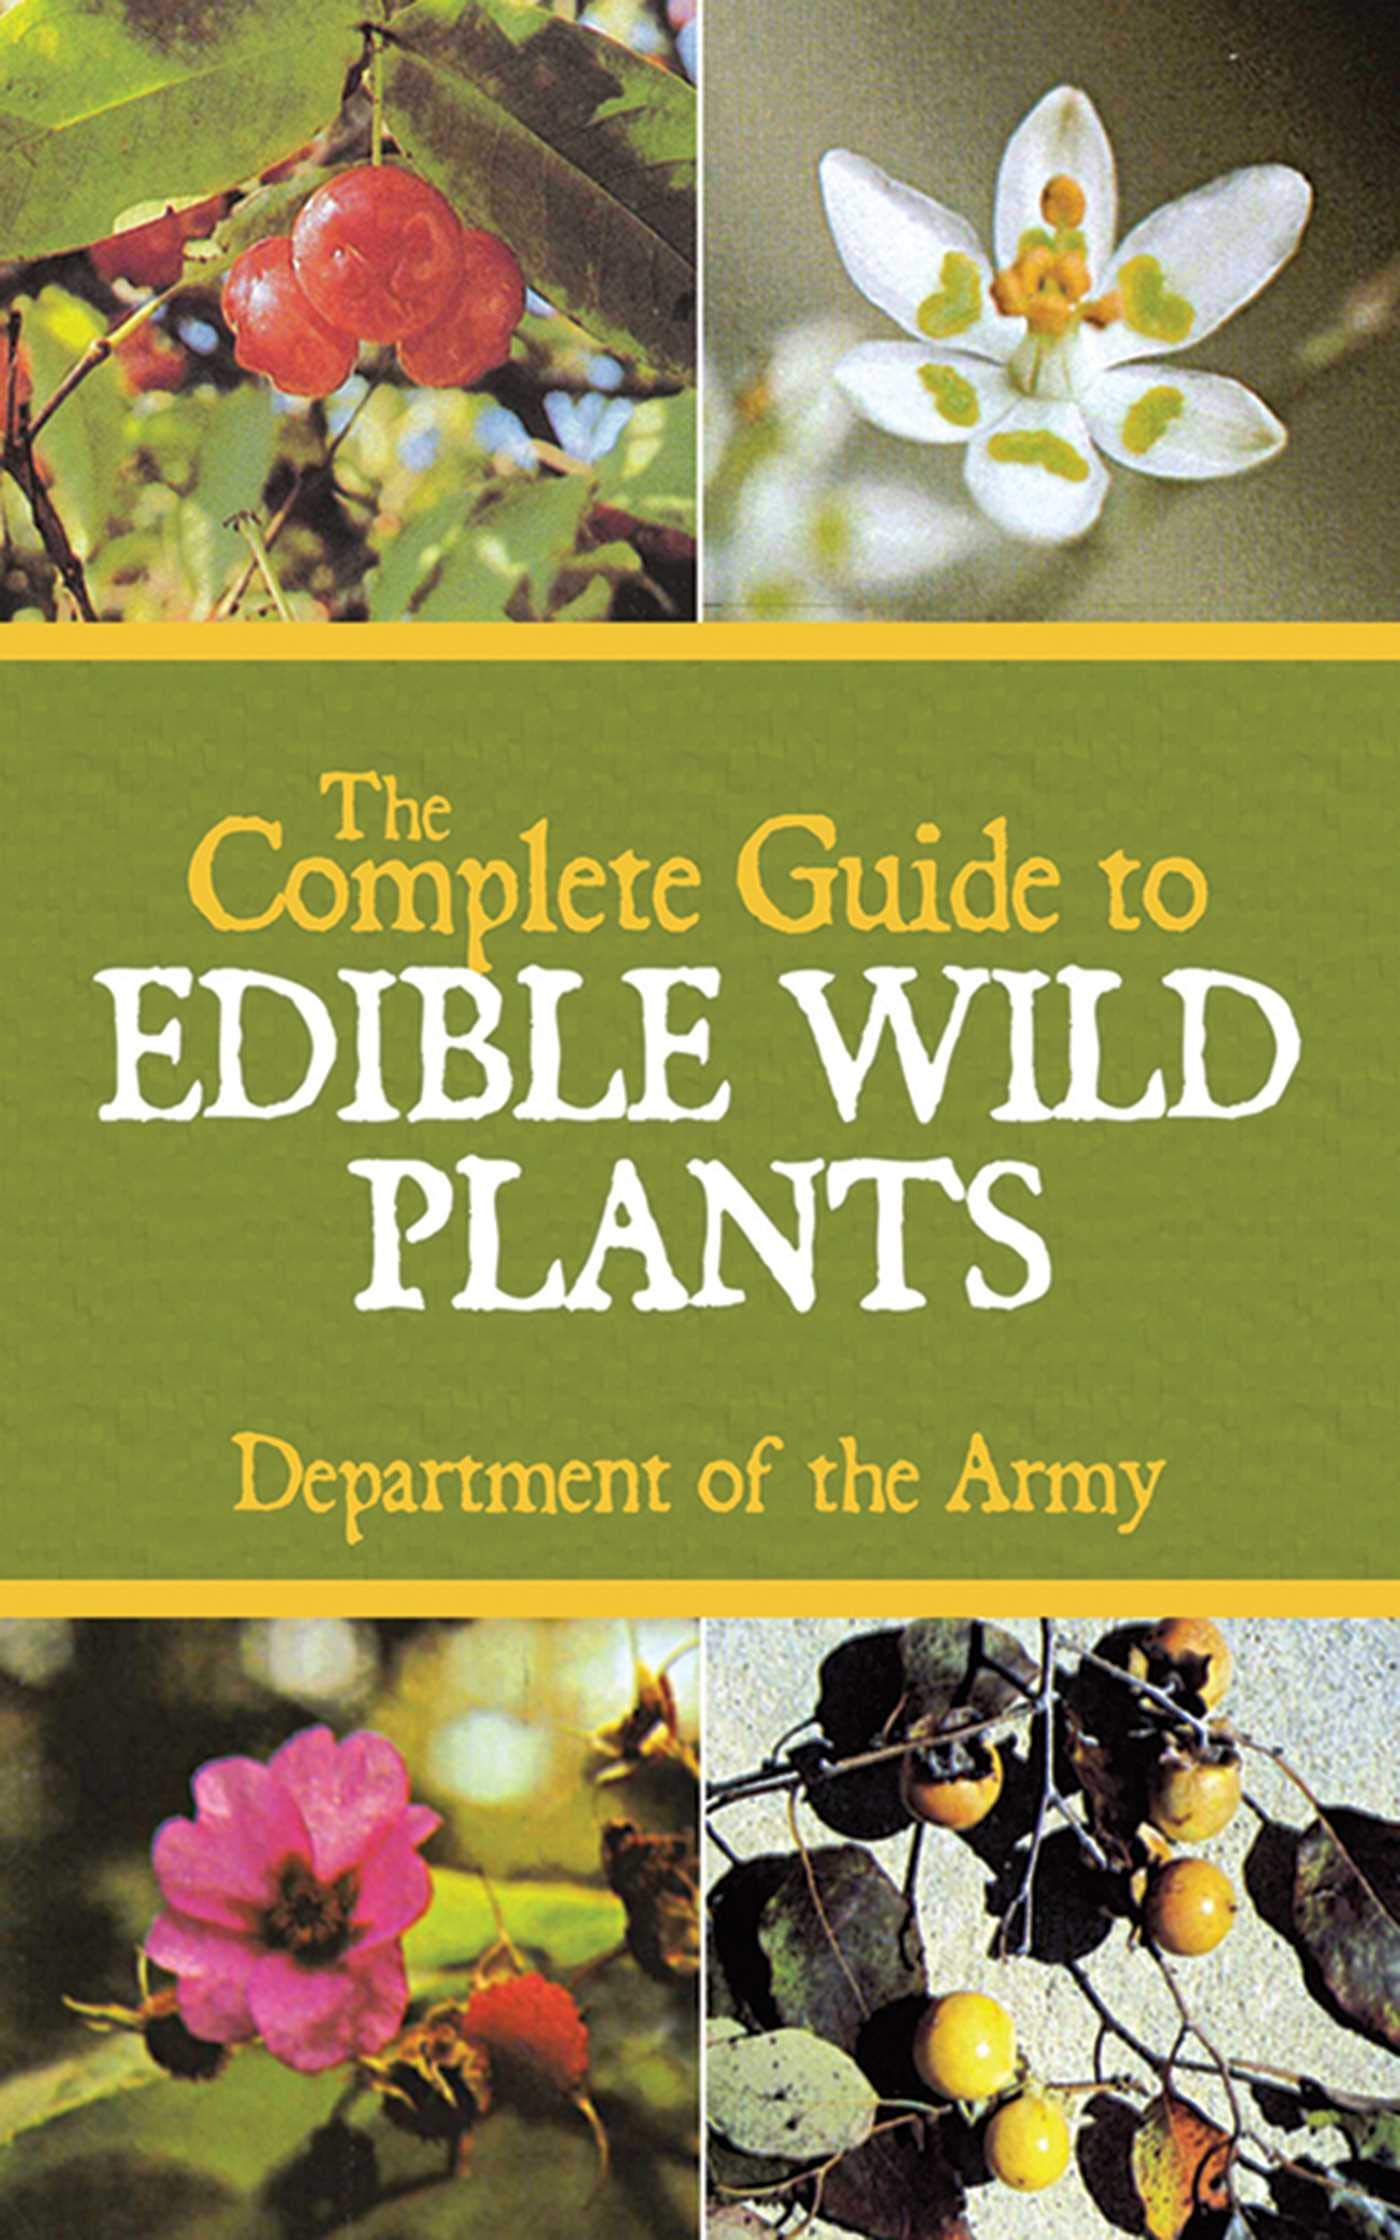 The Complete Guide To Edible Wild Plants - US Army